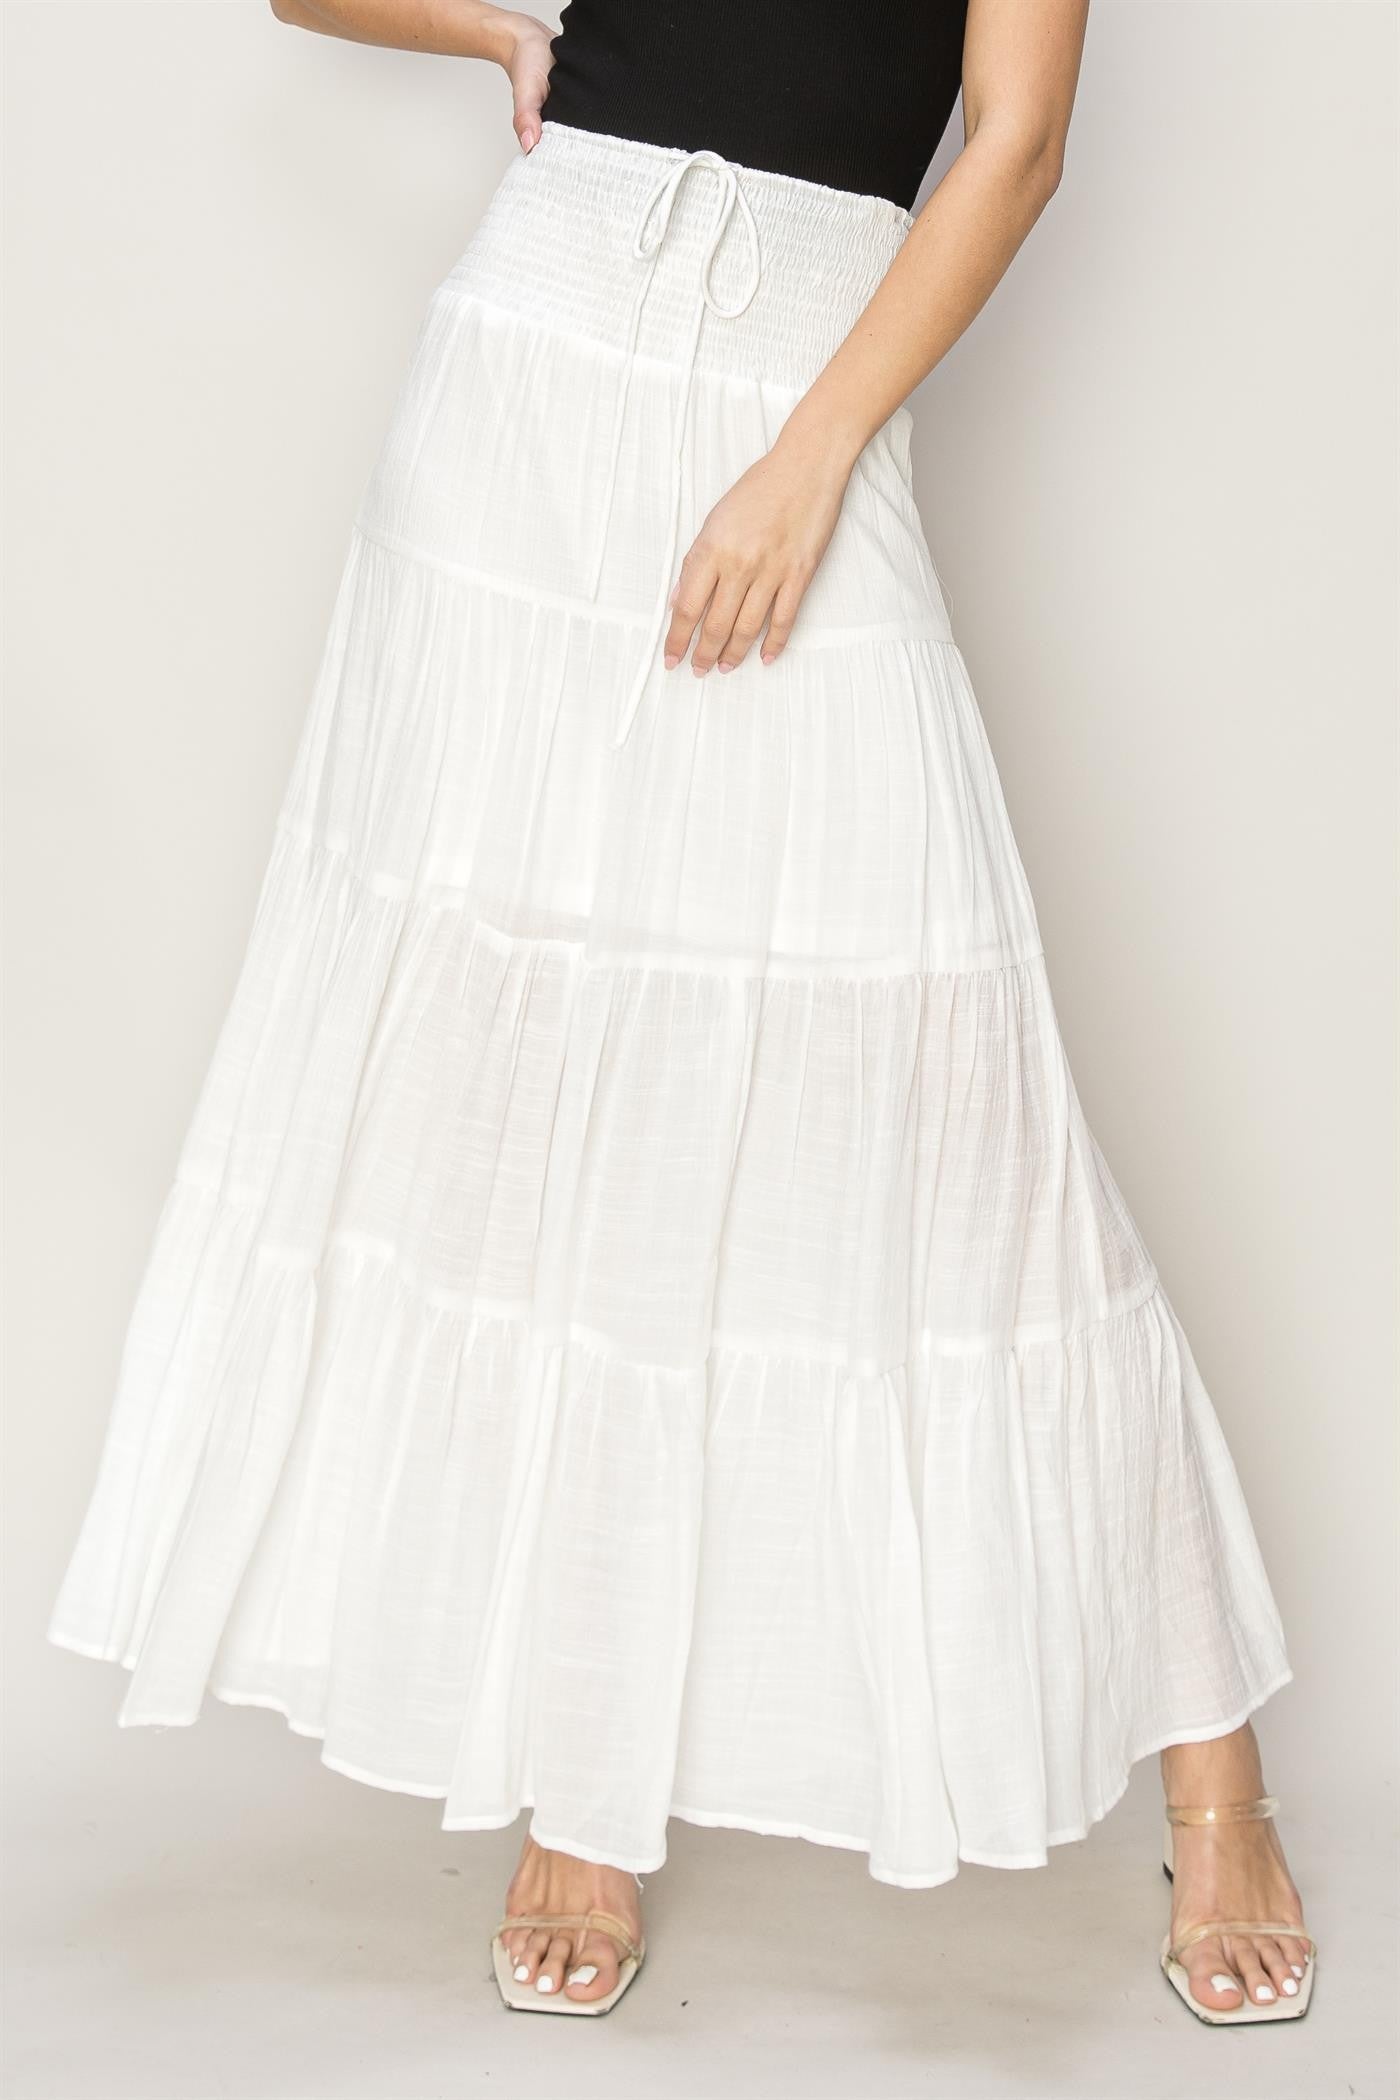 Skirt - Maxi Tiered - White-hotRAGS.com